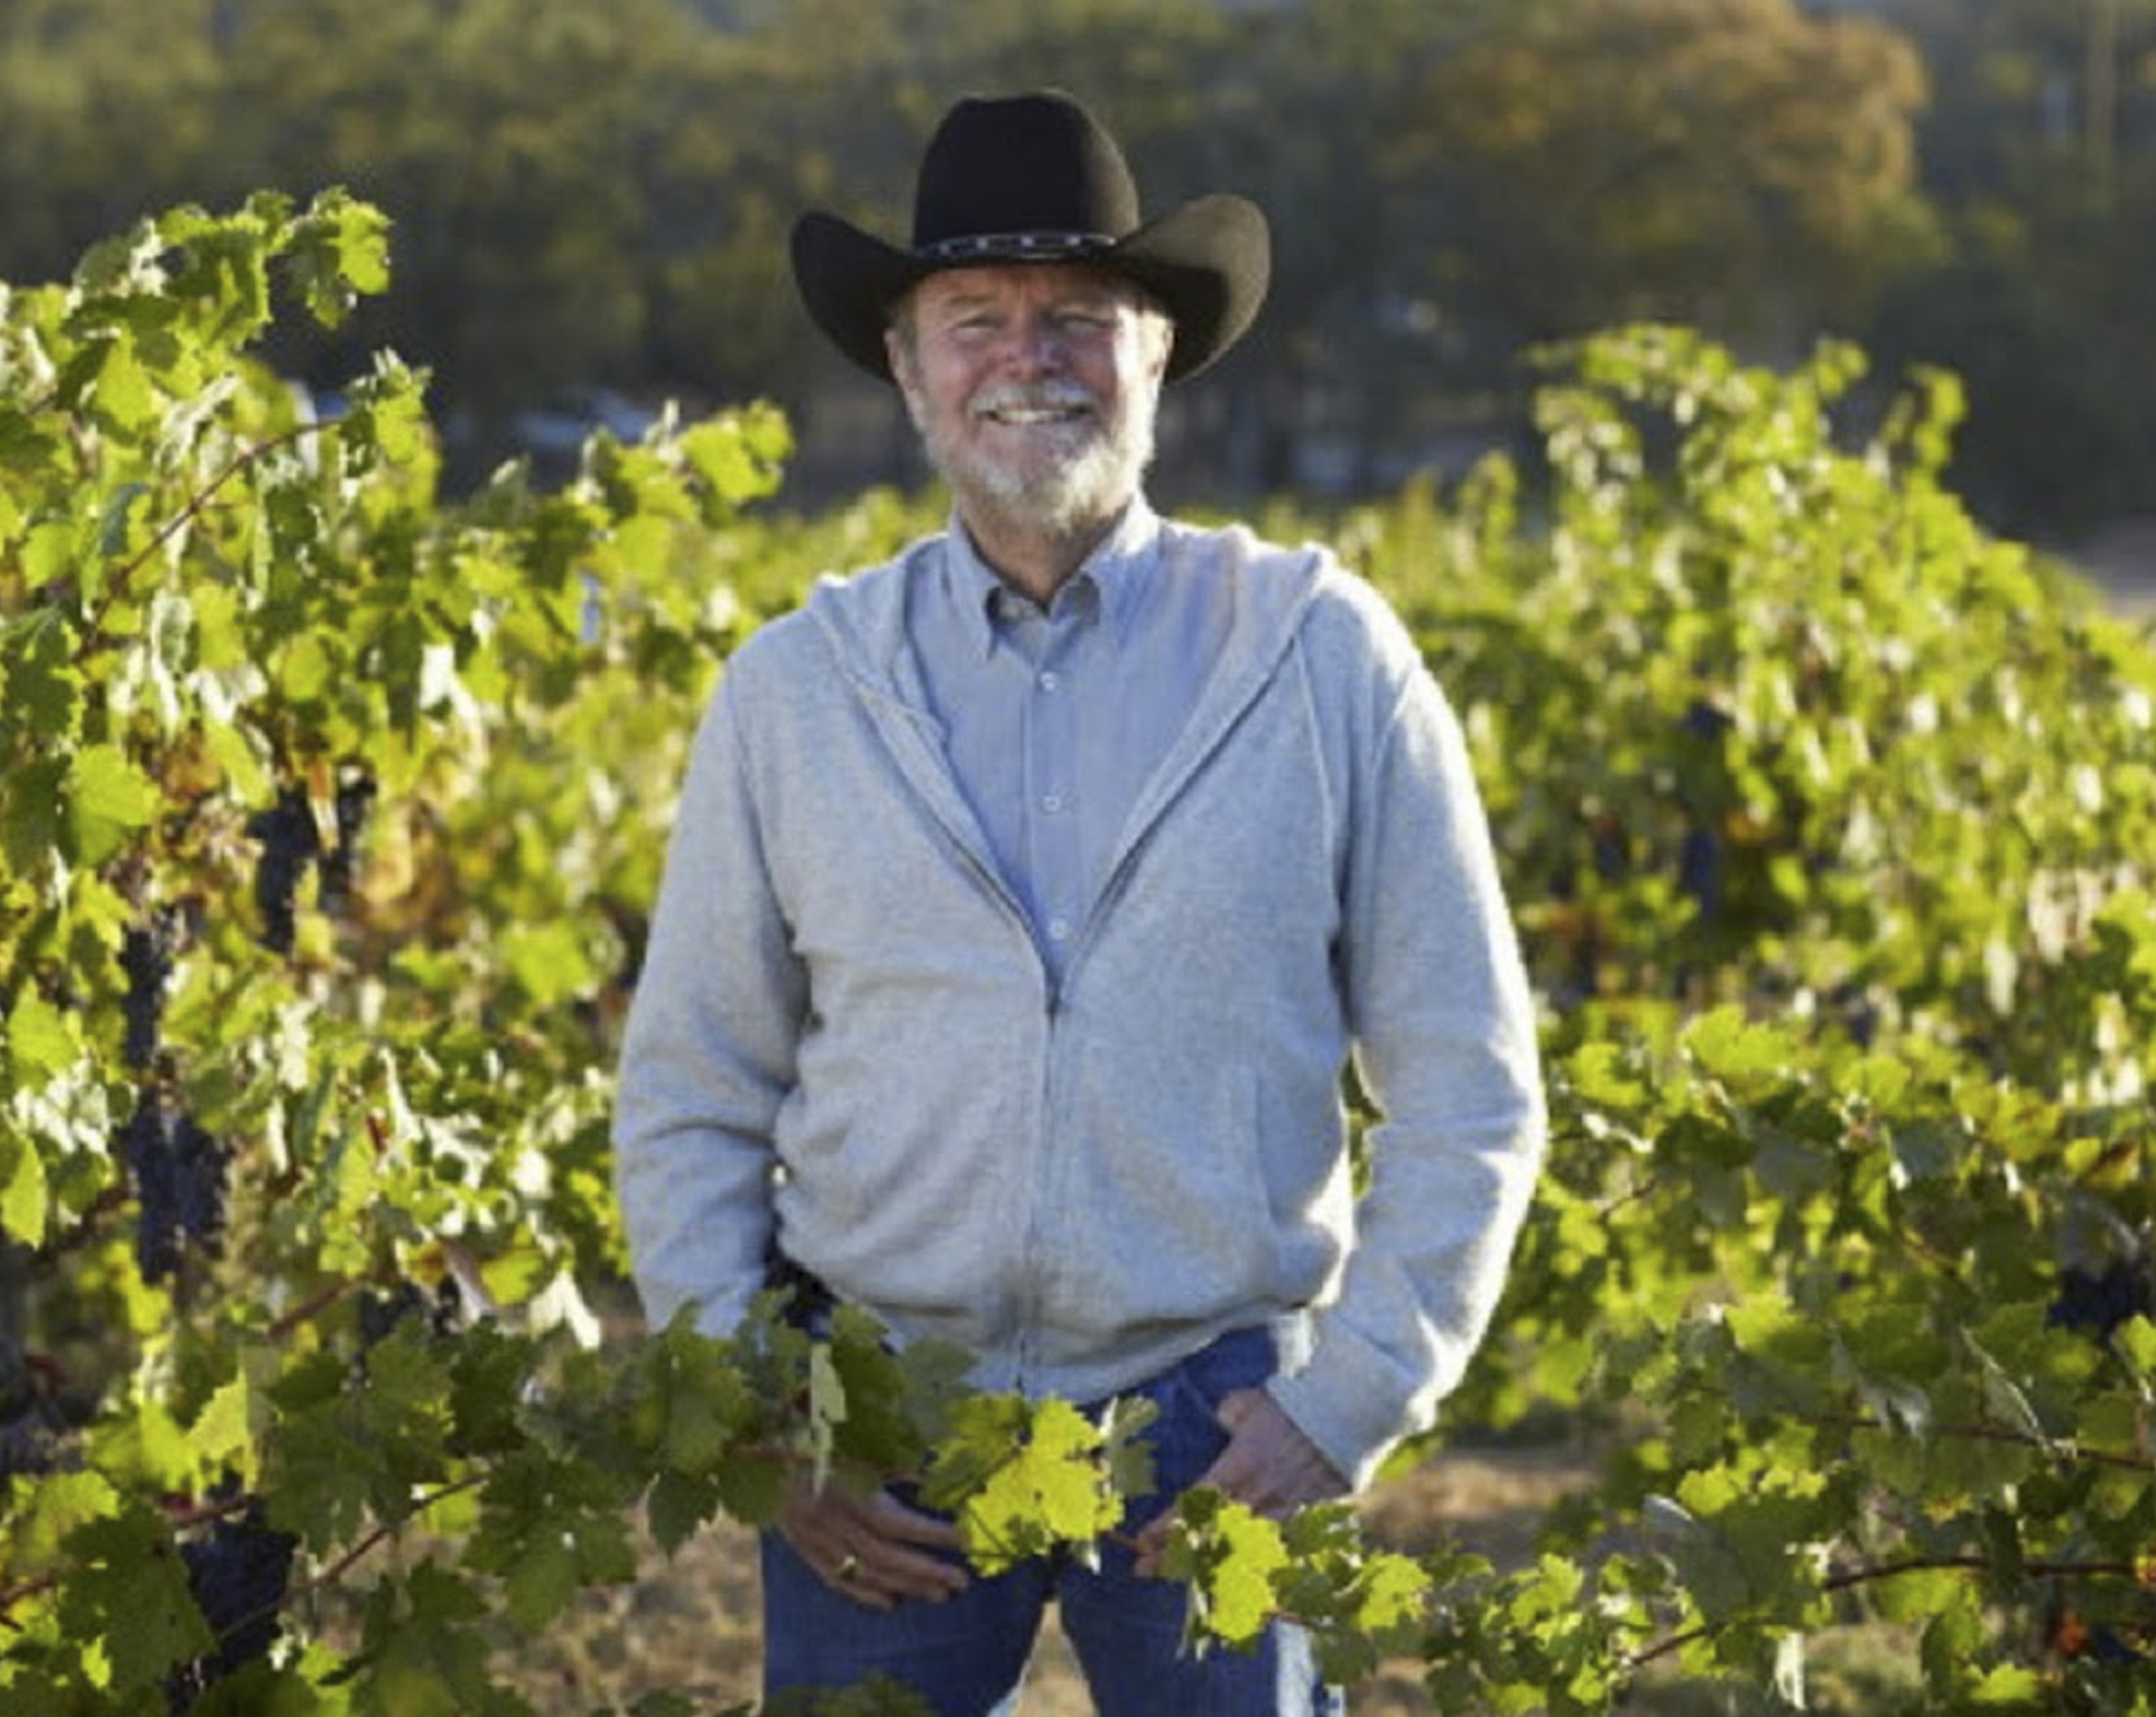 “King of zin” Joel Peterson, founder of California’s Ravenswood Winery.